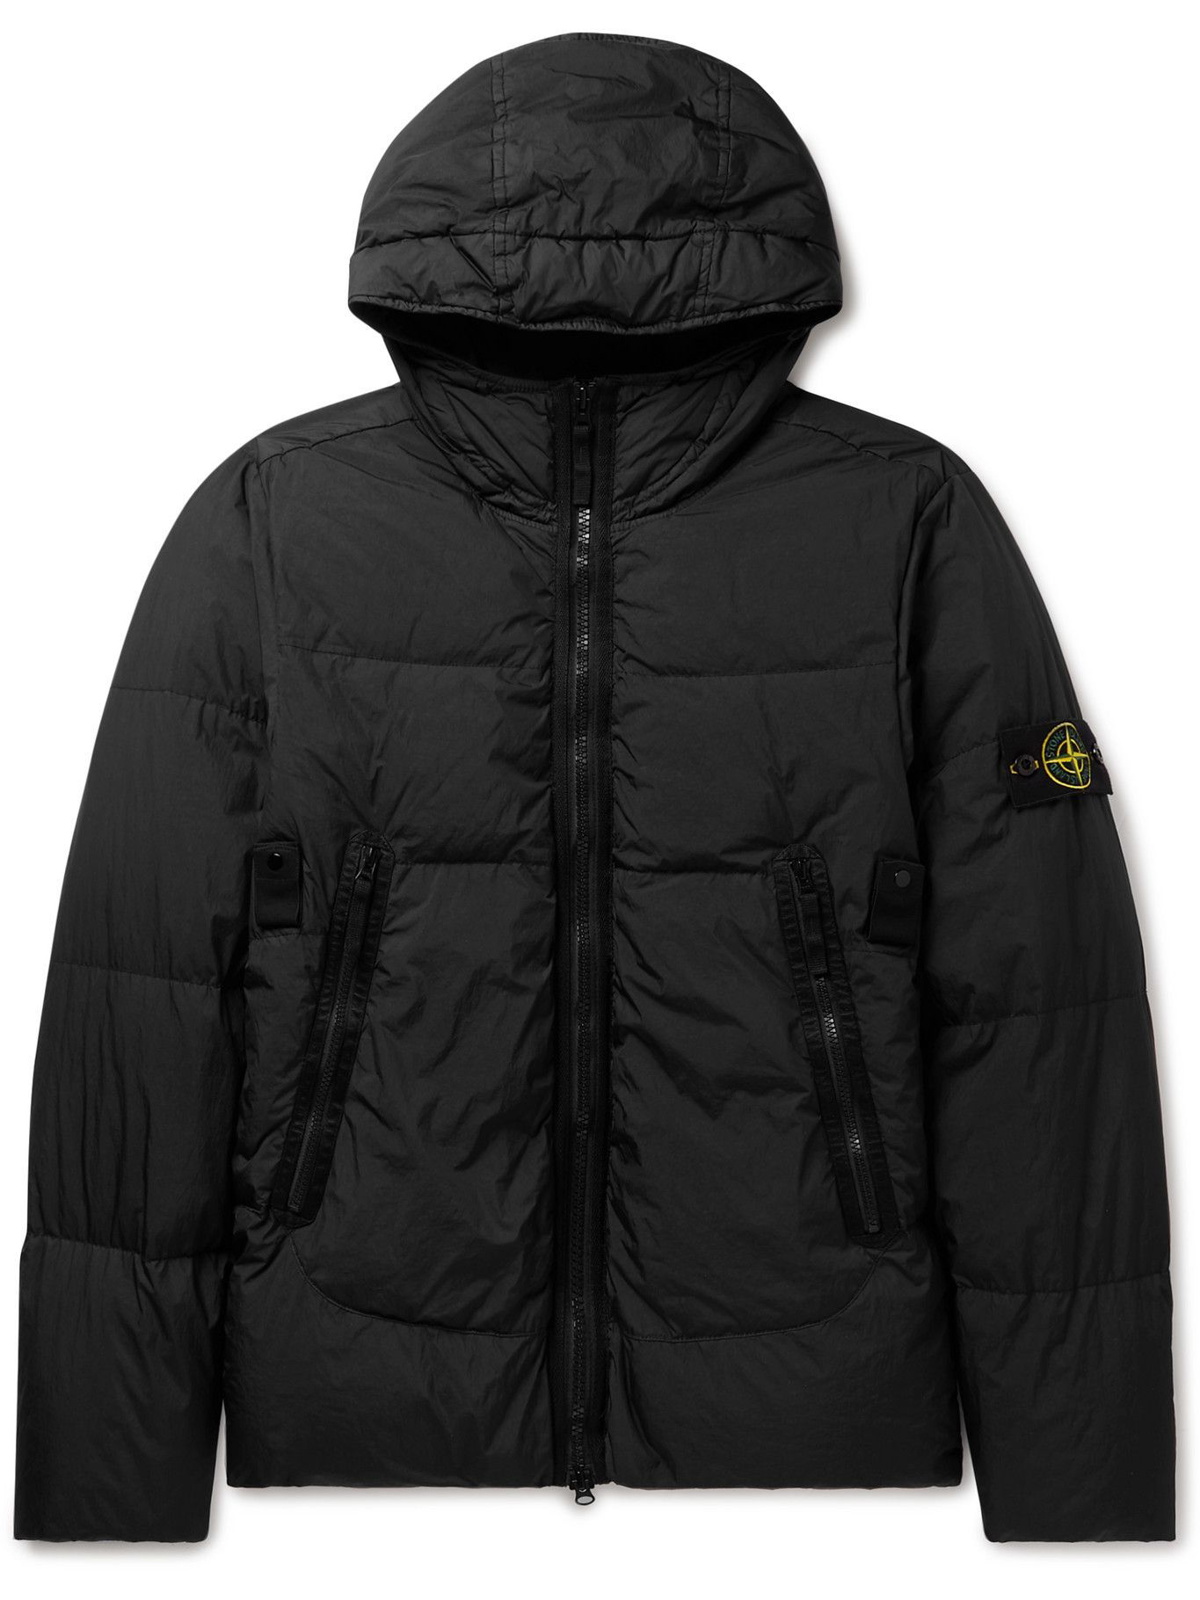 Stone Island - Logo-Appliquéd Garment-Dyed Quilted Nylon Down Hooded ...